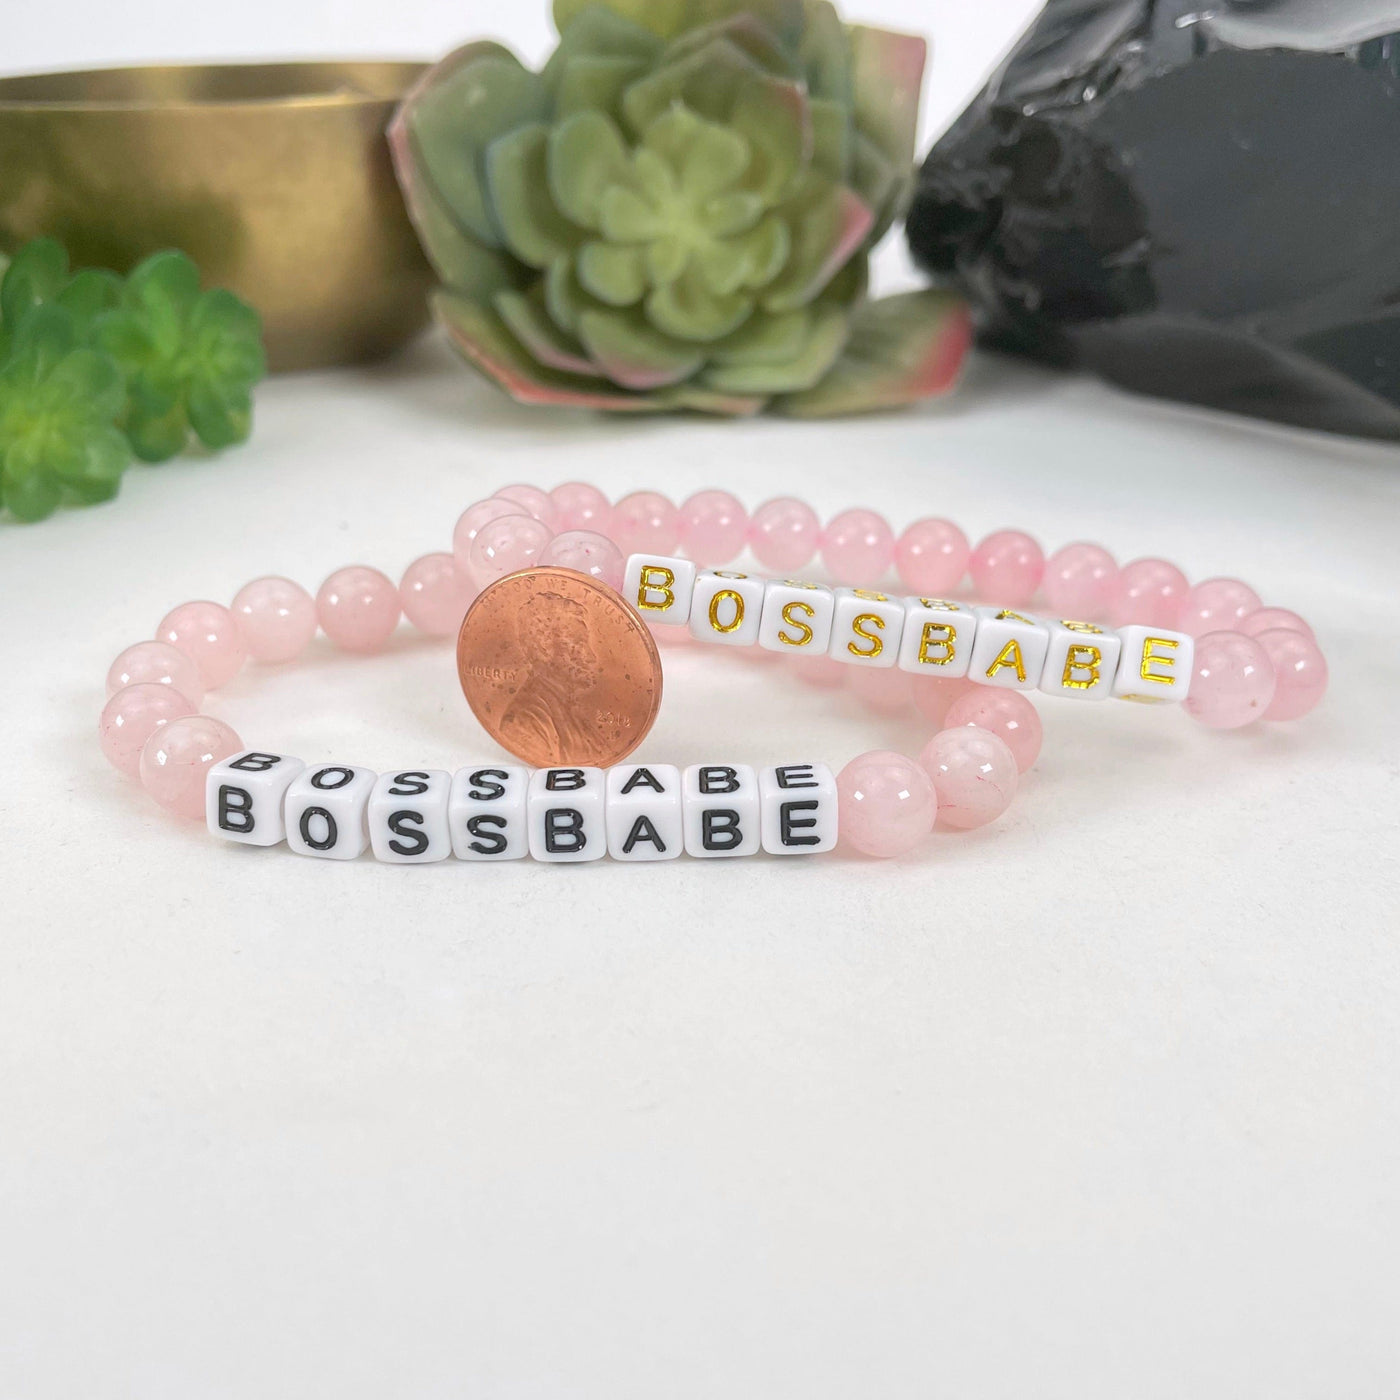 rose quartz beaded bracelets with penny for size reference